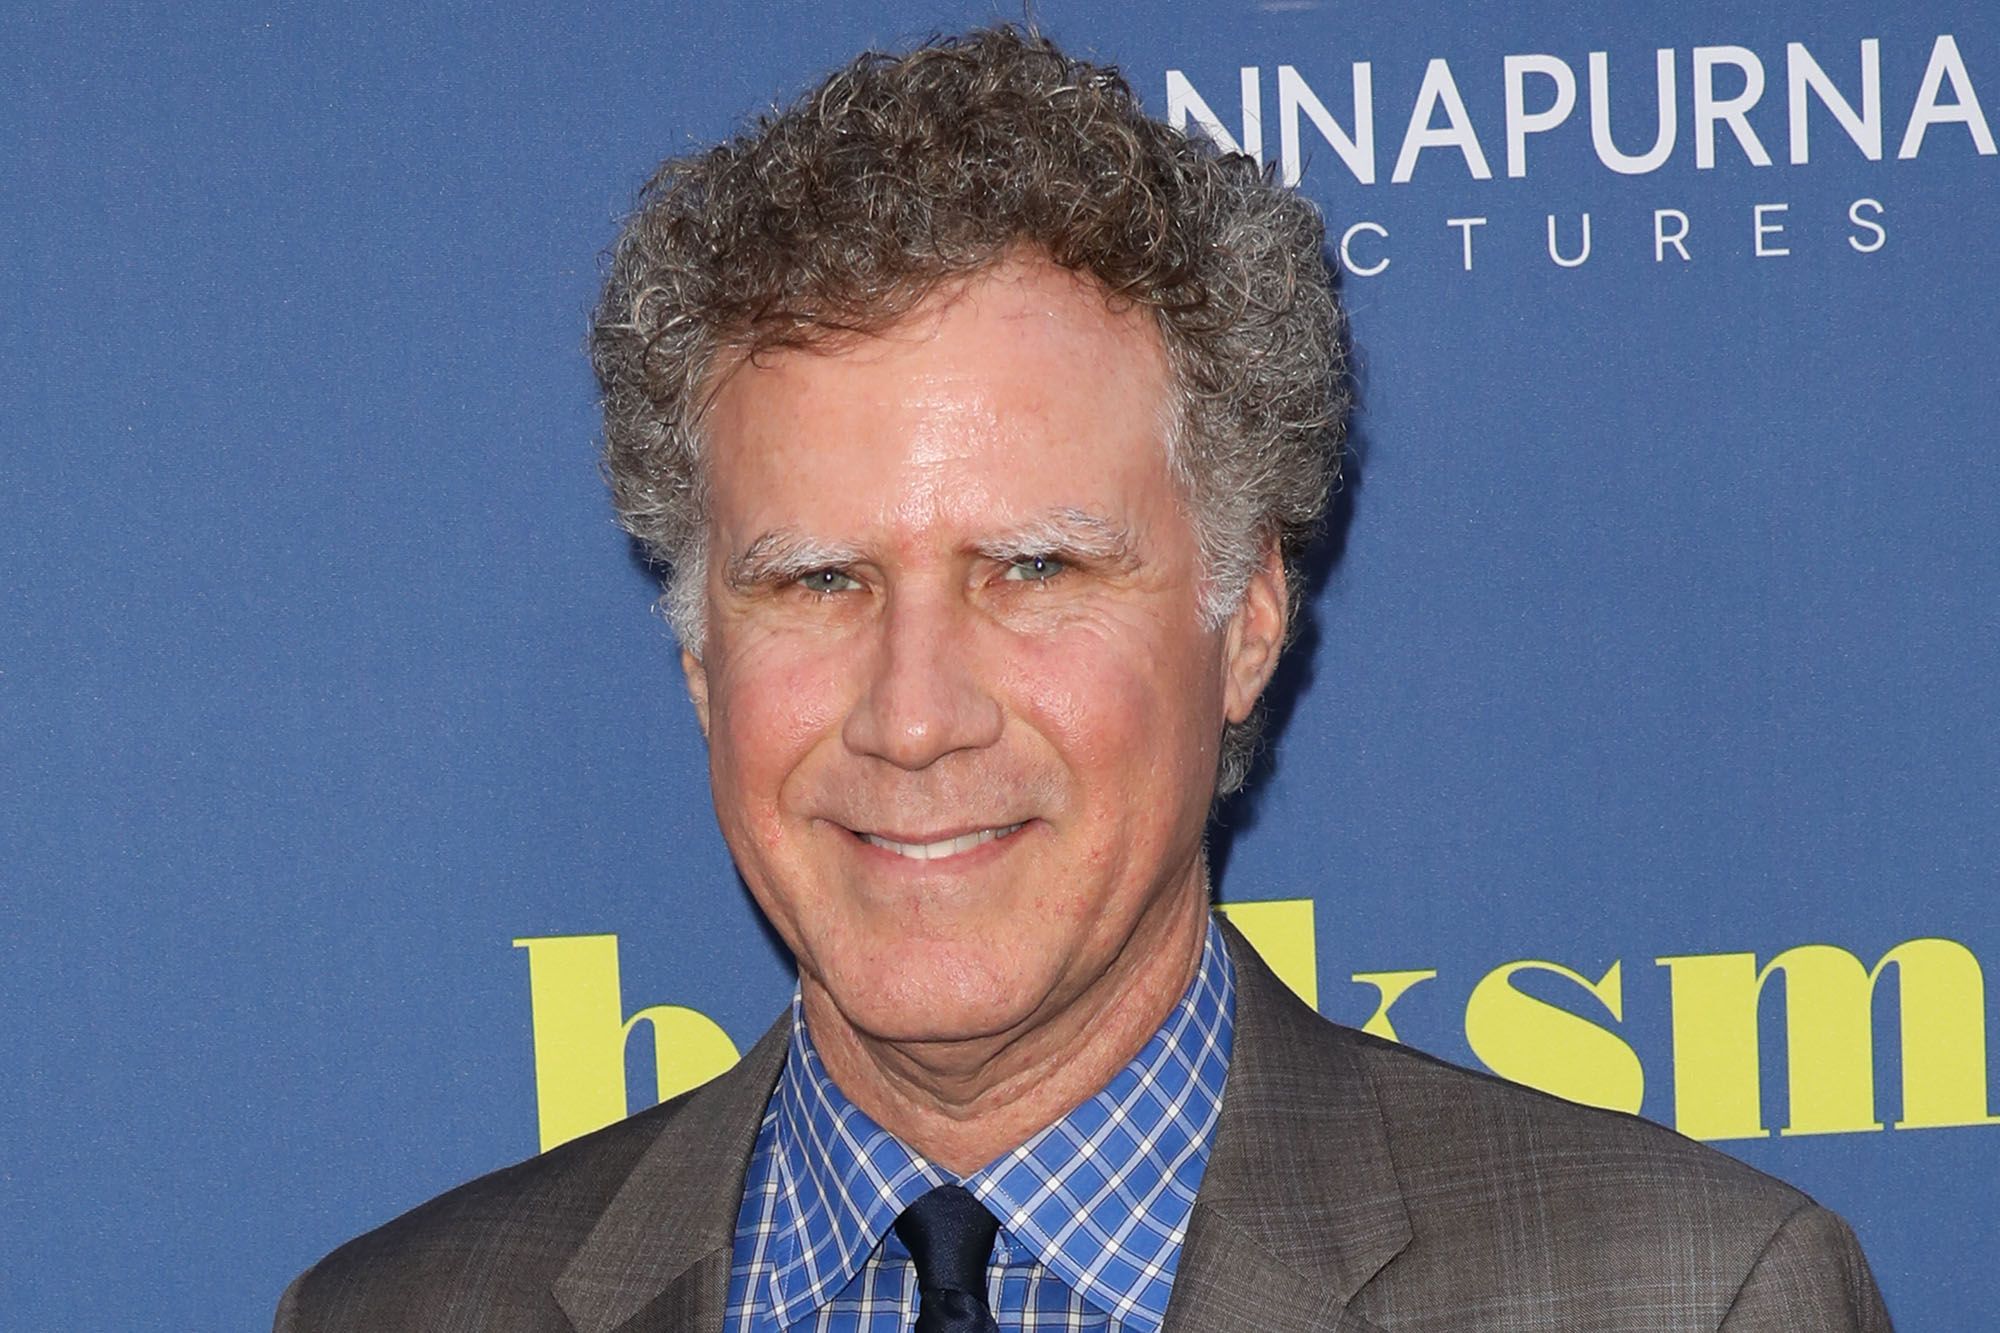 Will Ferrell Wiki, Bio, Age, Net Worth, and Other Facts